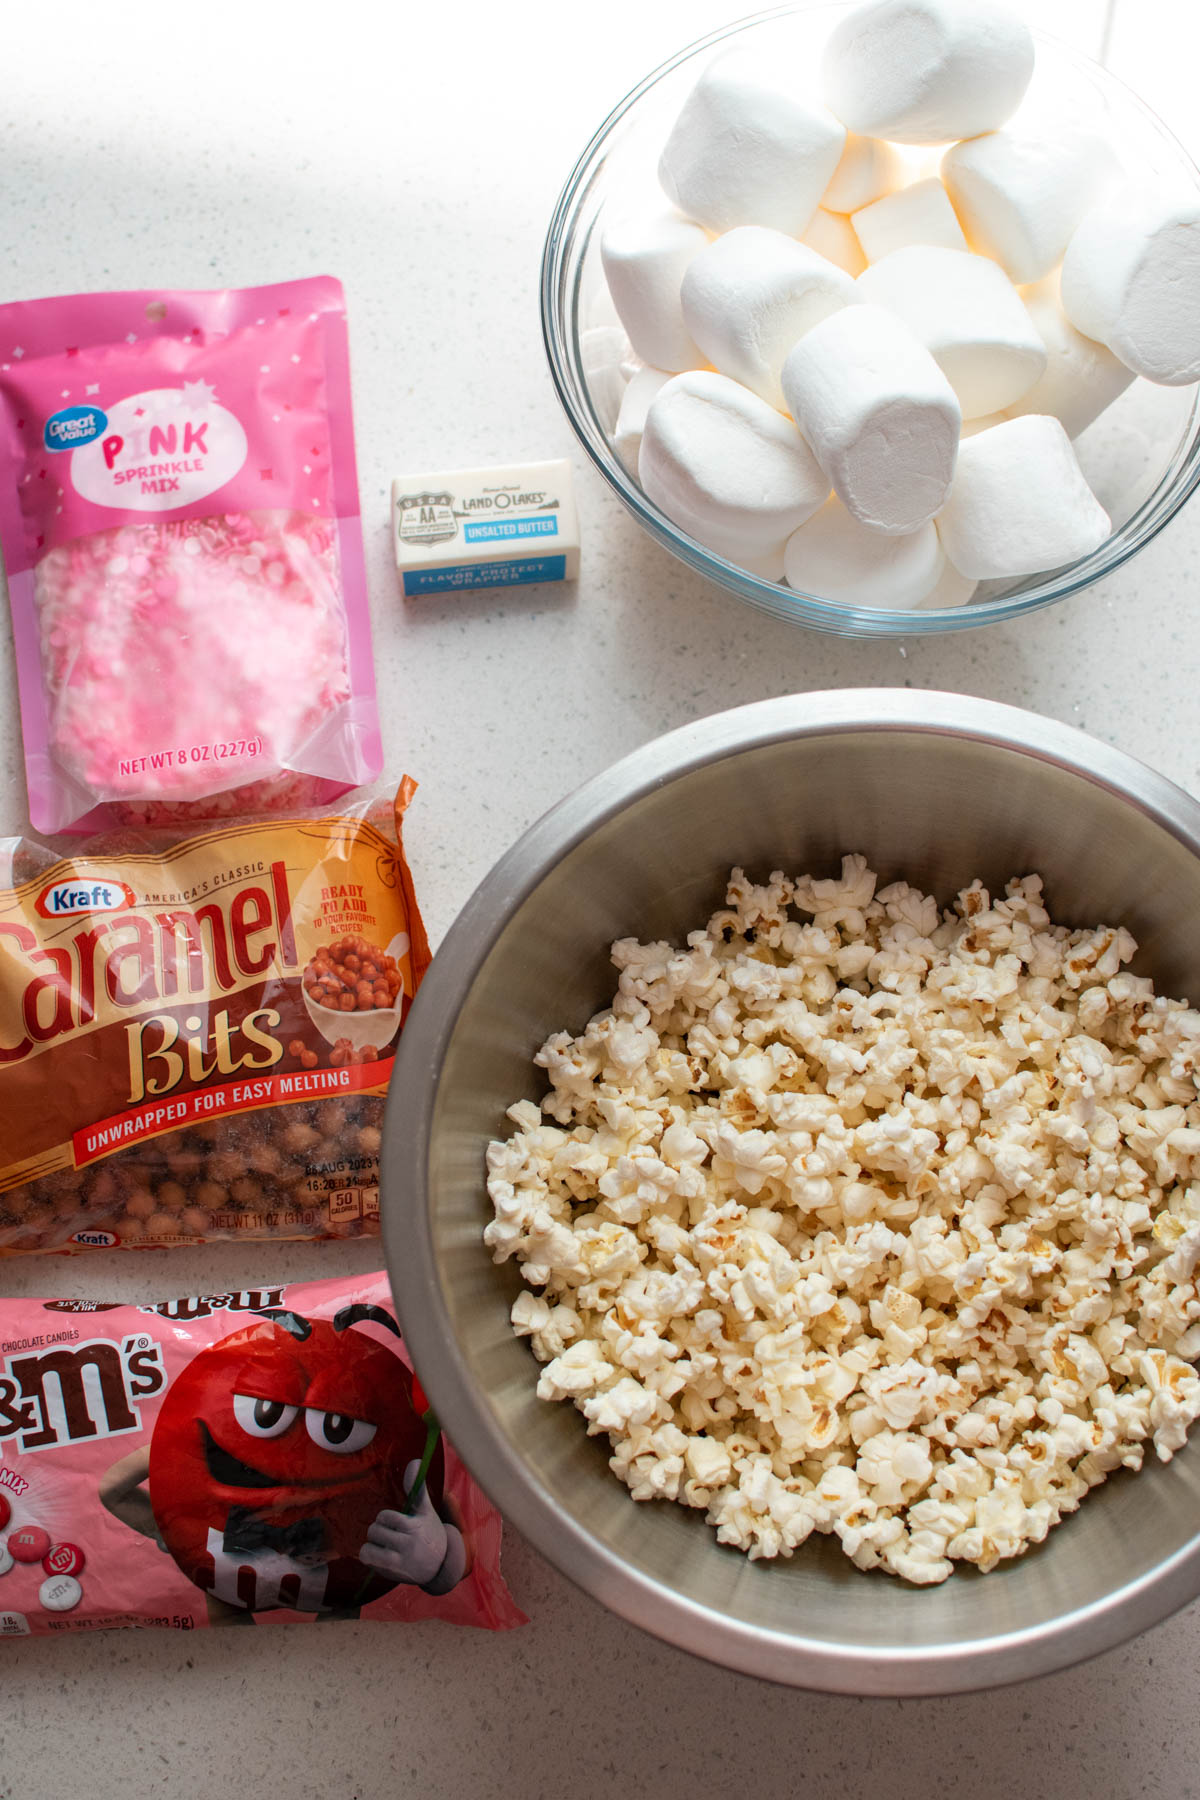 Ingredients for caramel popcorn cake on quartz counter including popcorn, marshmallows, and candy.